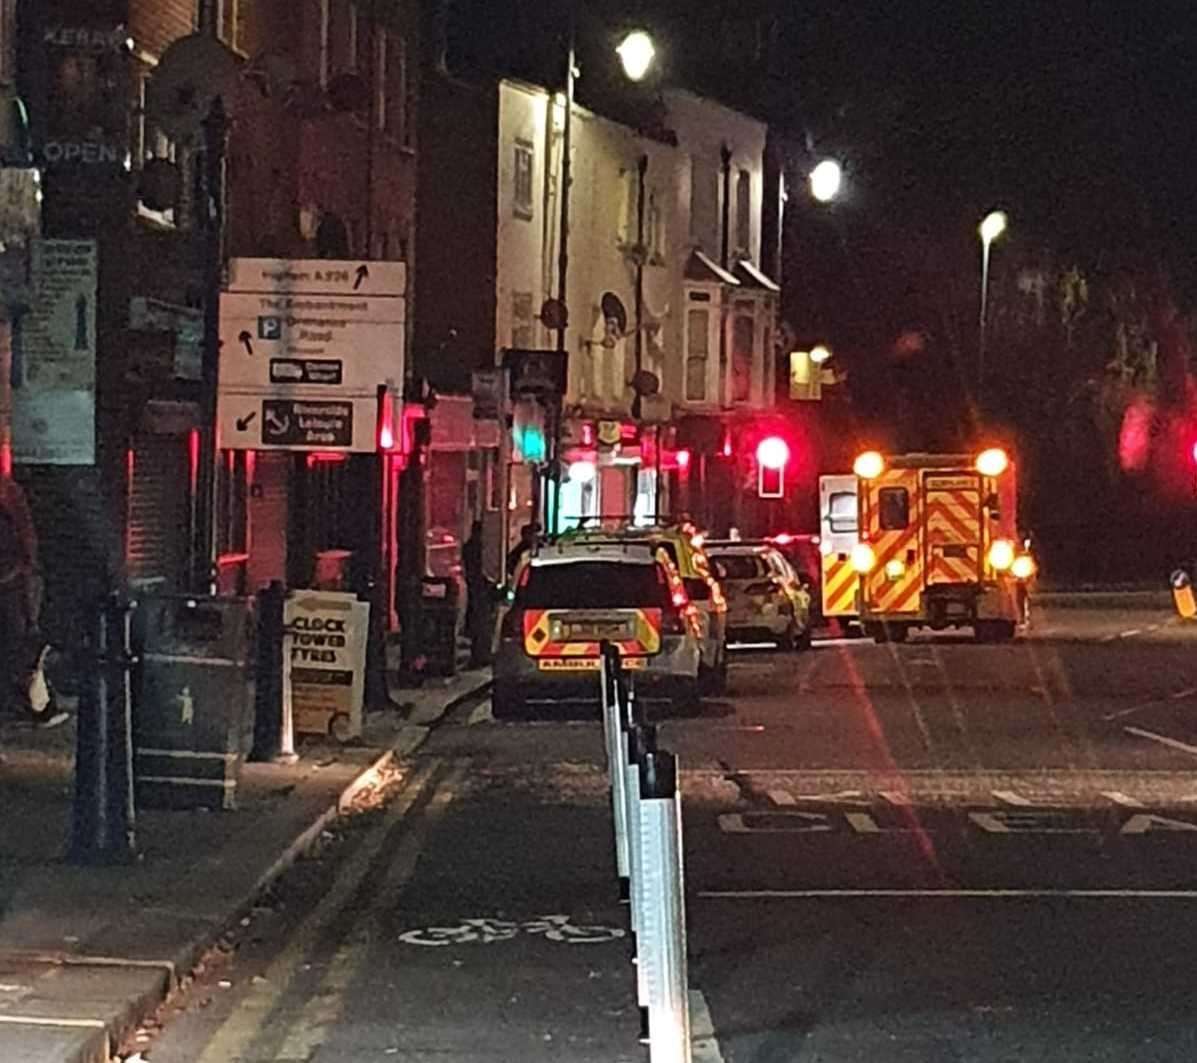 Police were called to Milton Road in Gravesend after a man was assaulted. Picture: Jonjo O'Connell